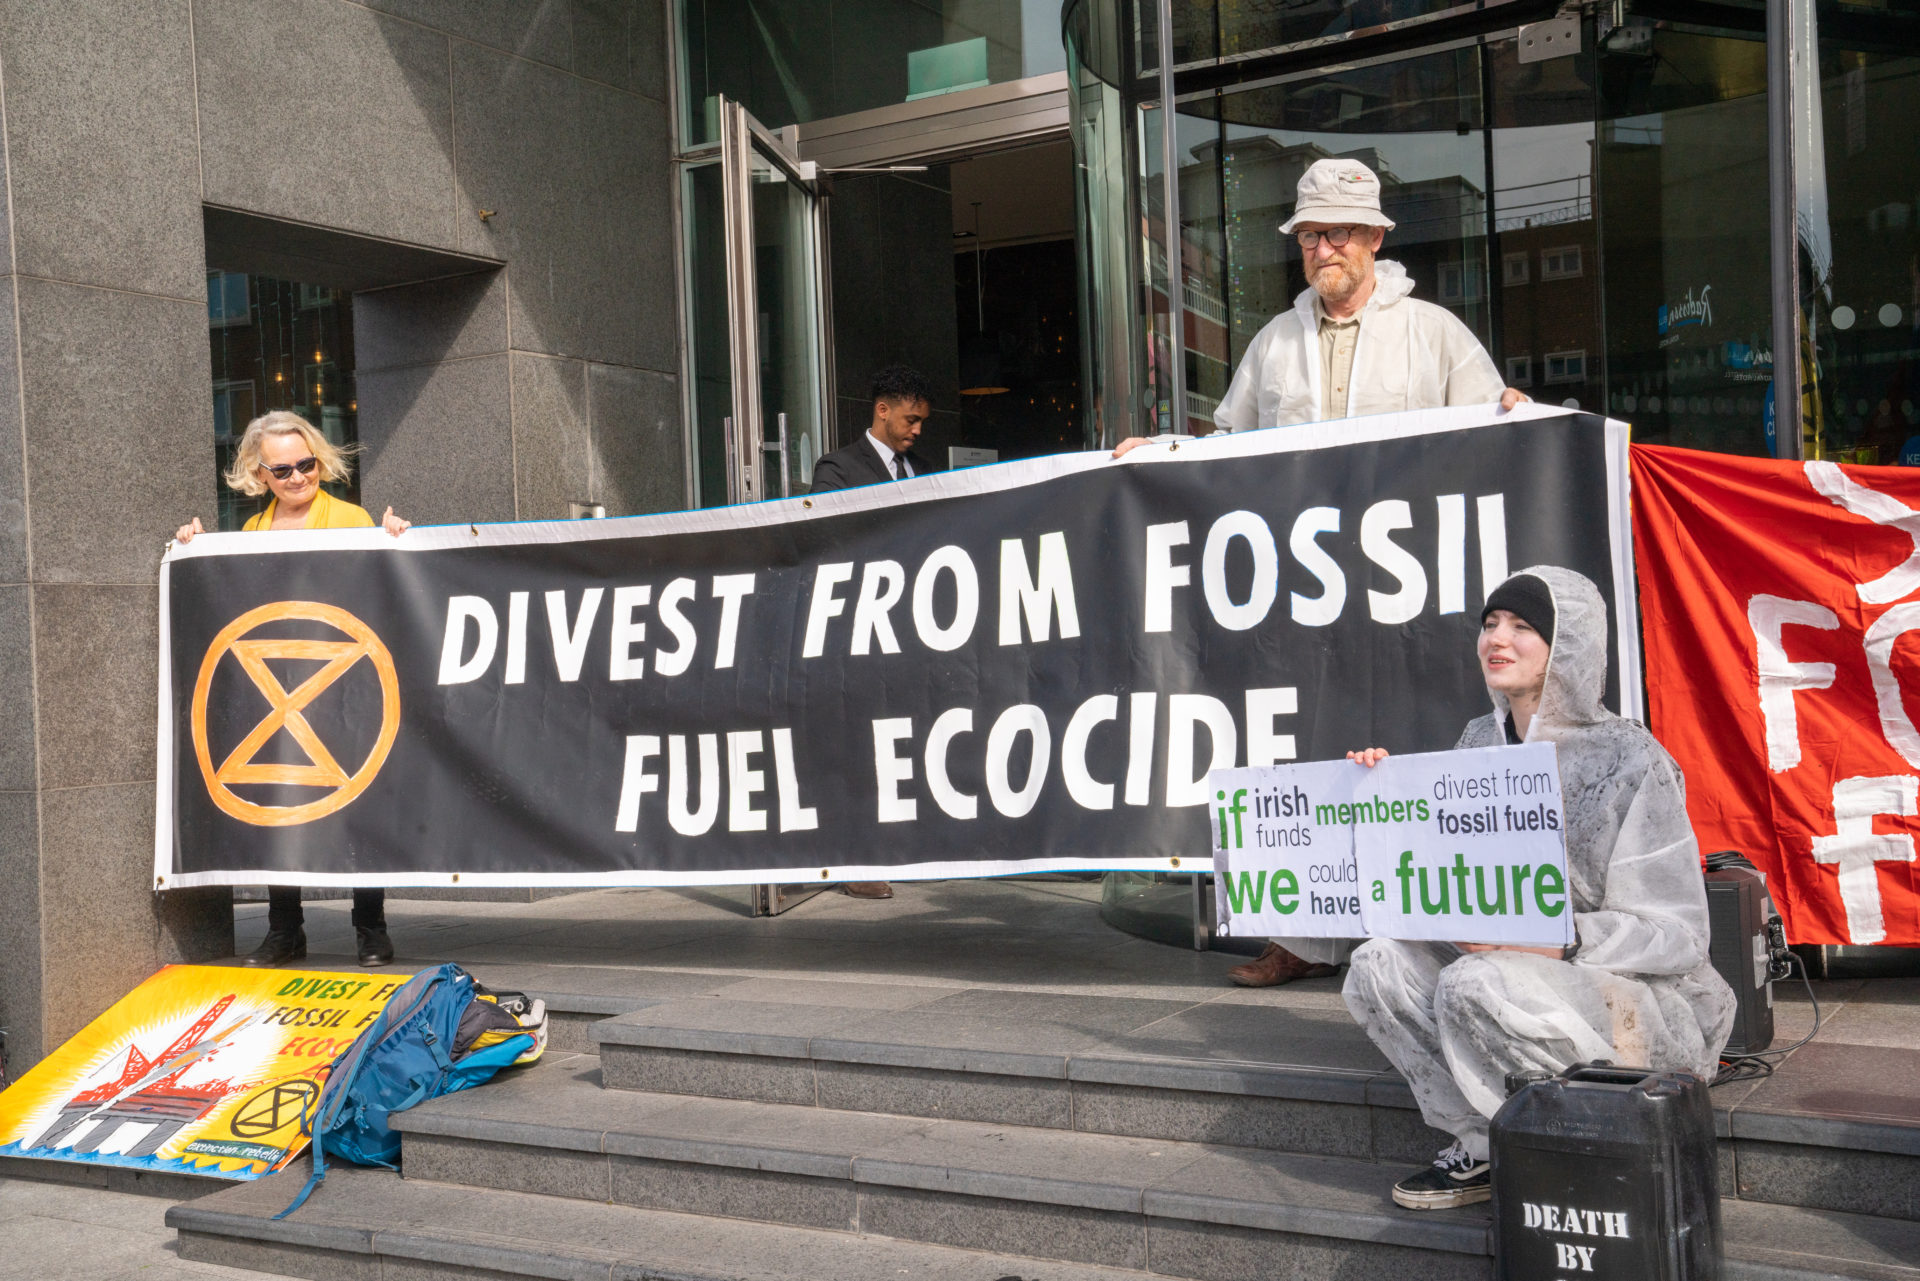 Extinction Rebellion is holding a “die in” protest outside a finance conference in Dublin. (Photos by Tom Douglas)